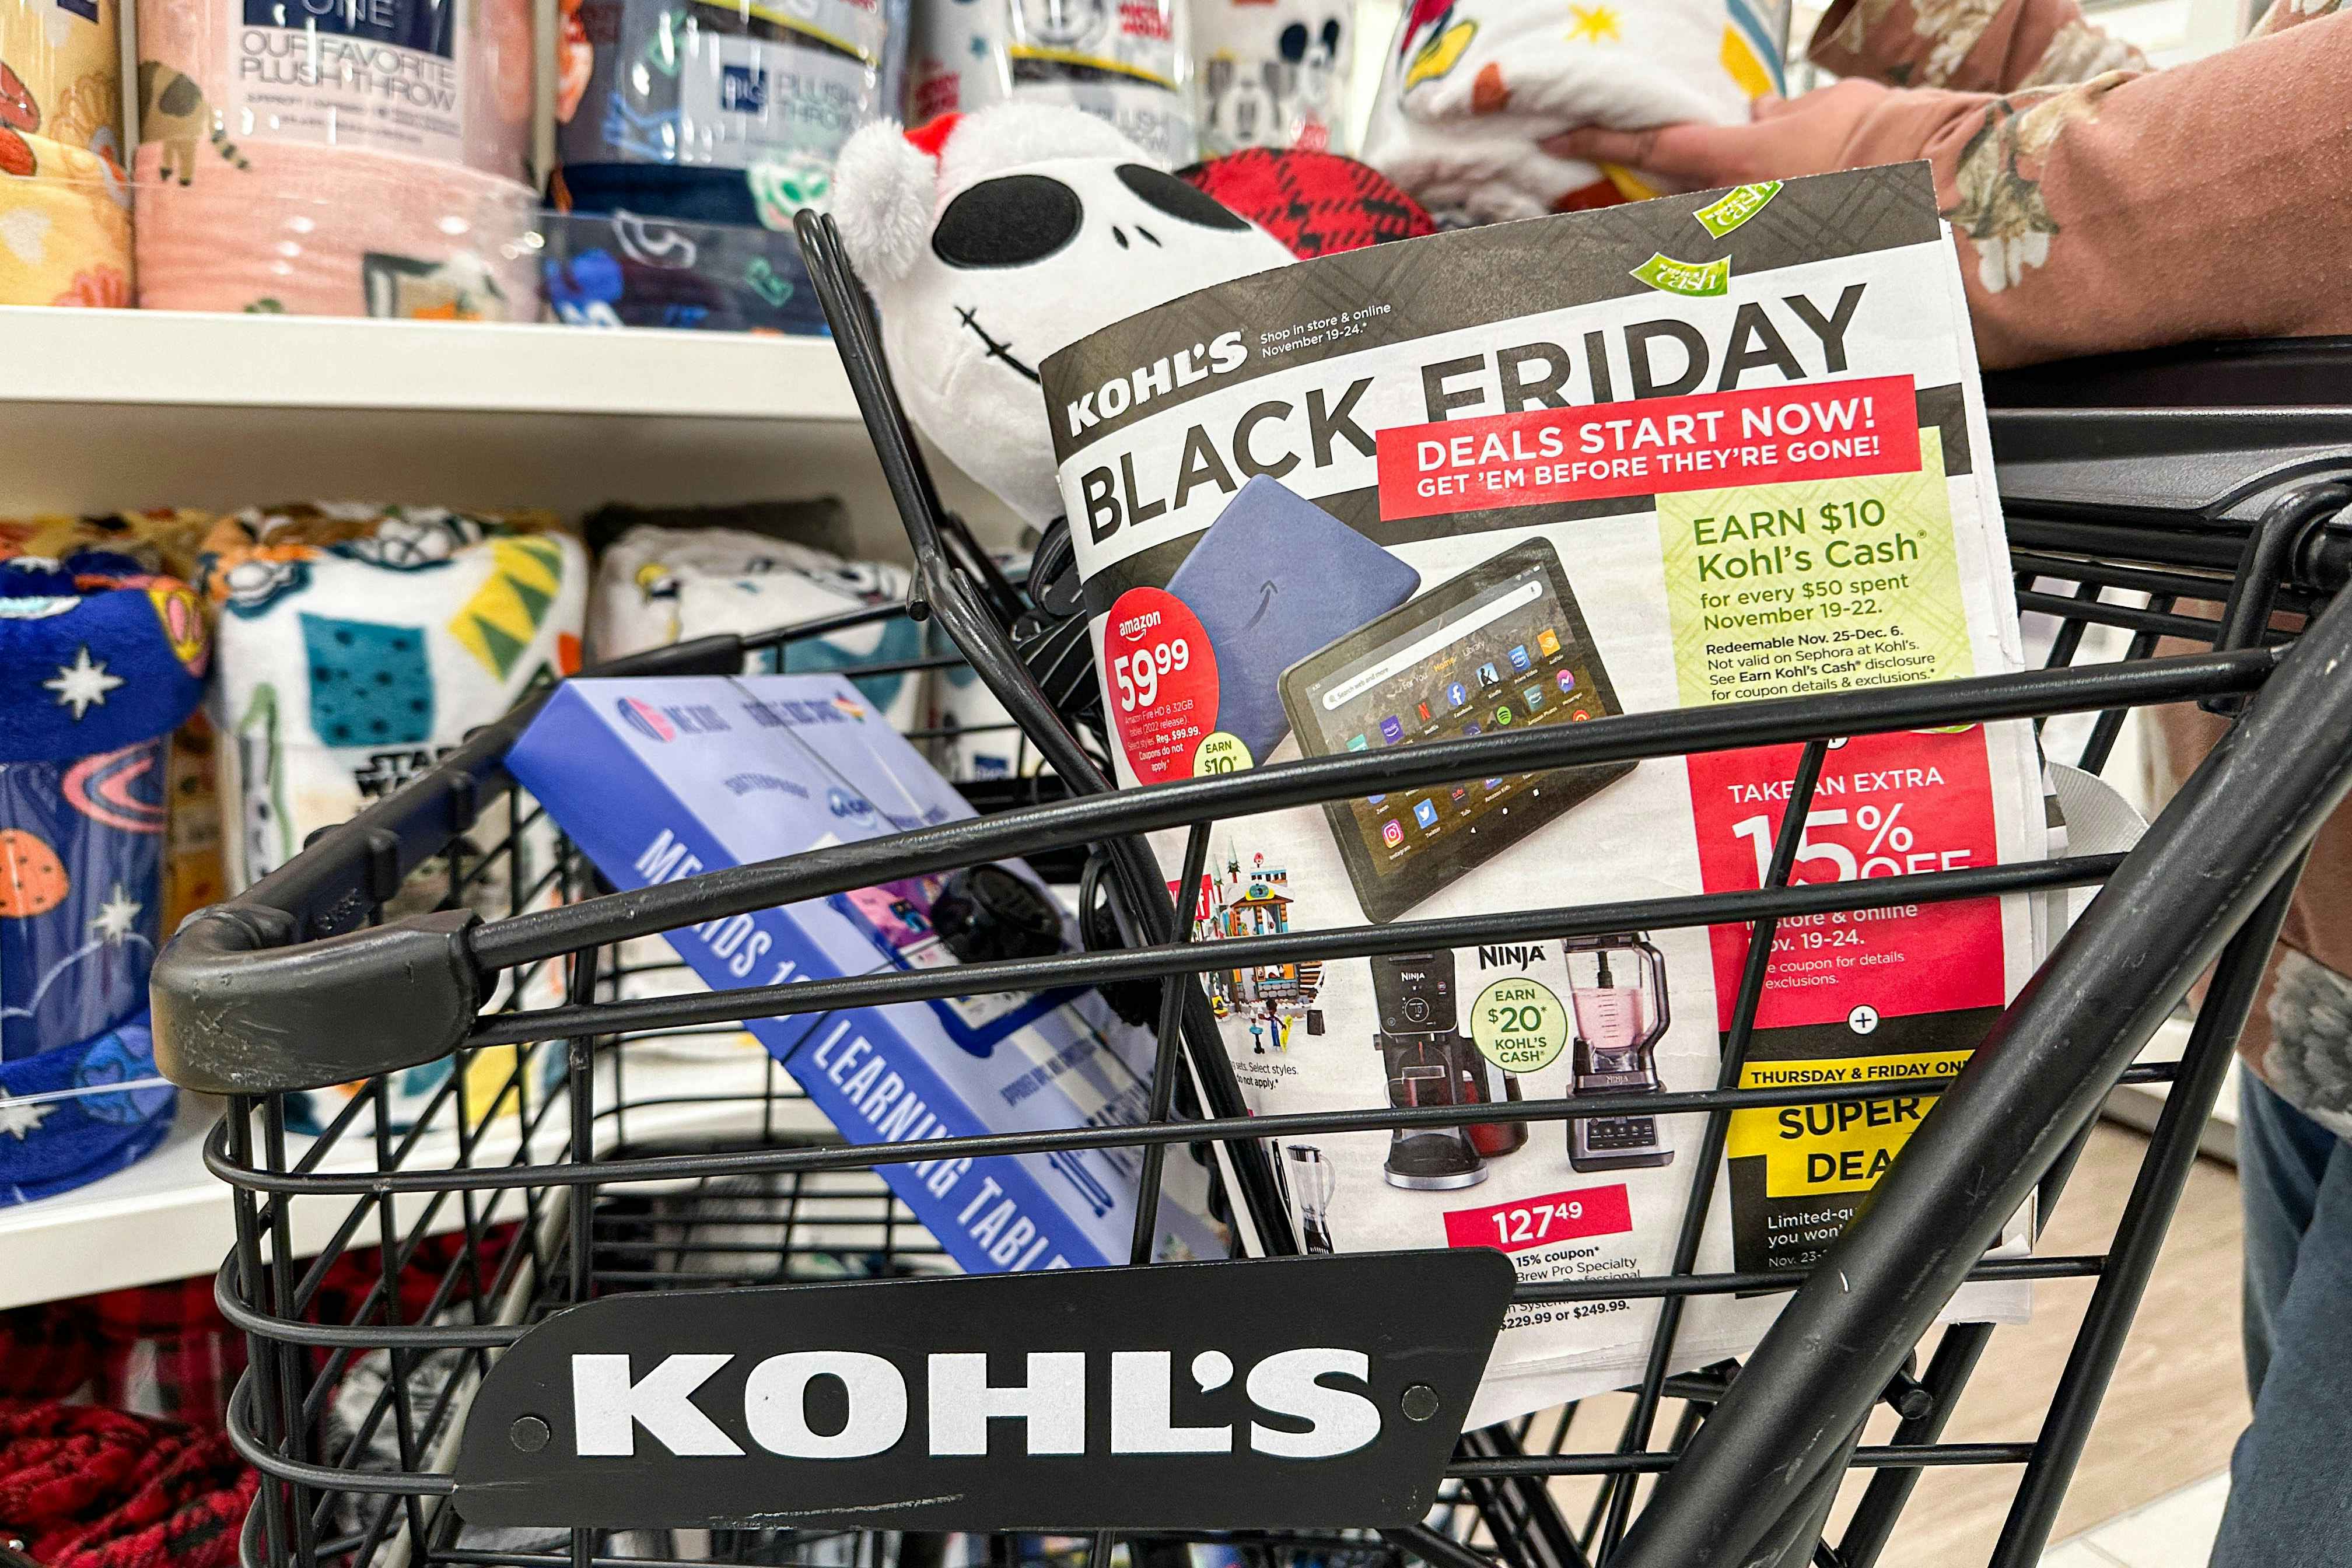 Kohl's reveals Black Friday deals, with more to come later this month